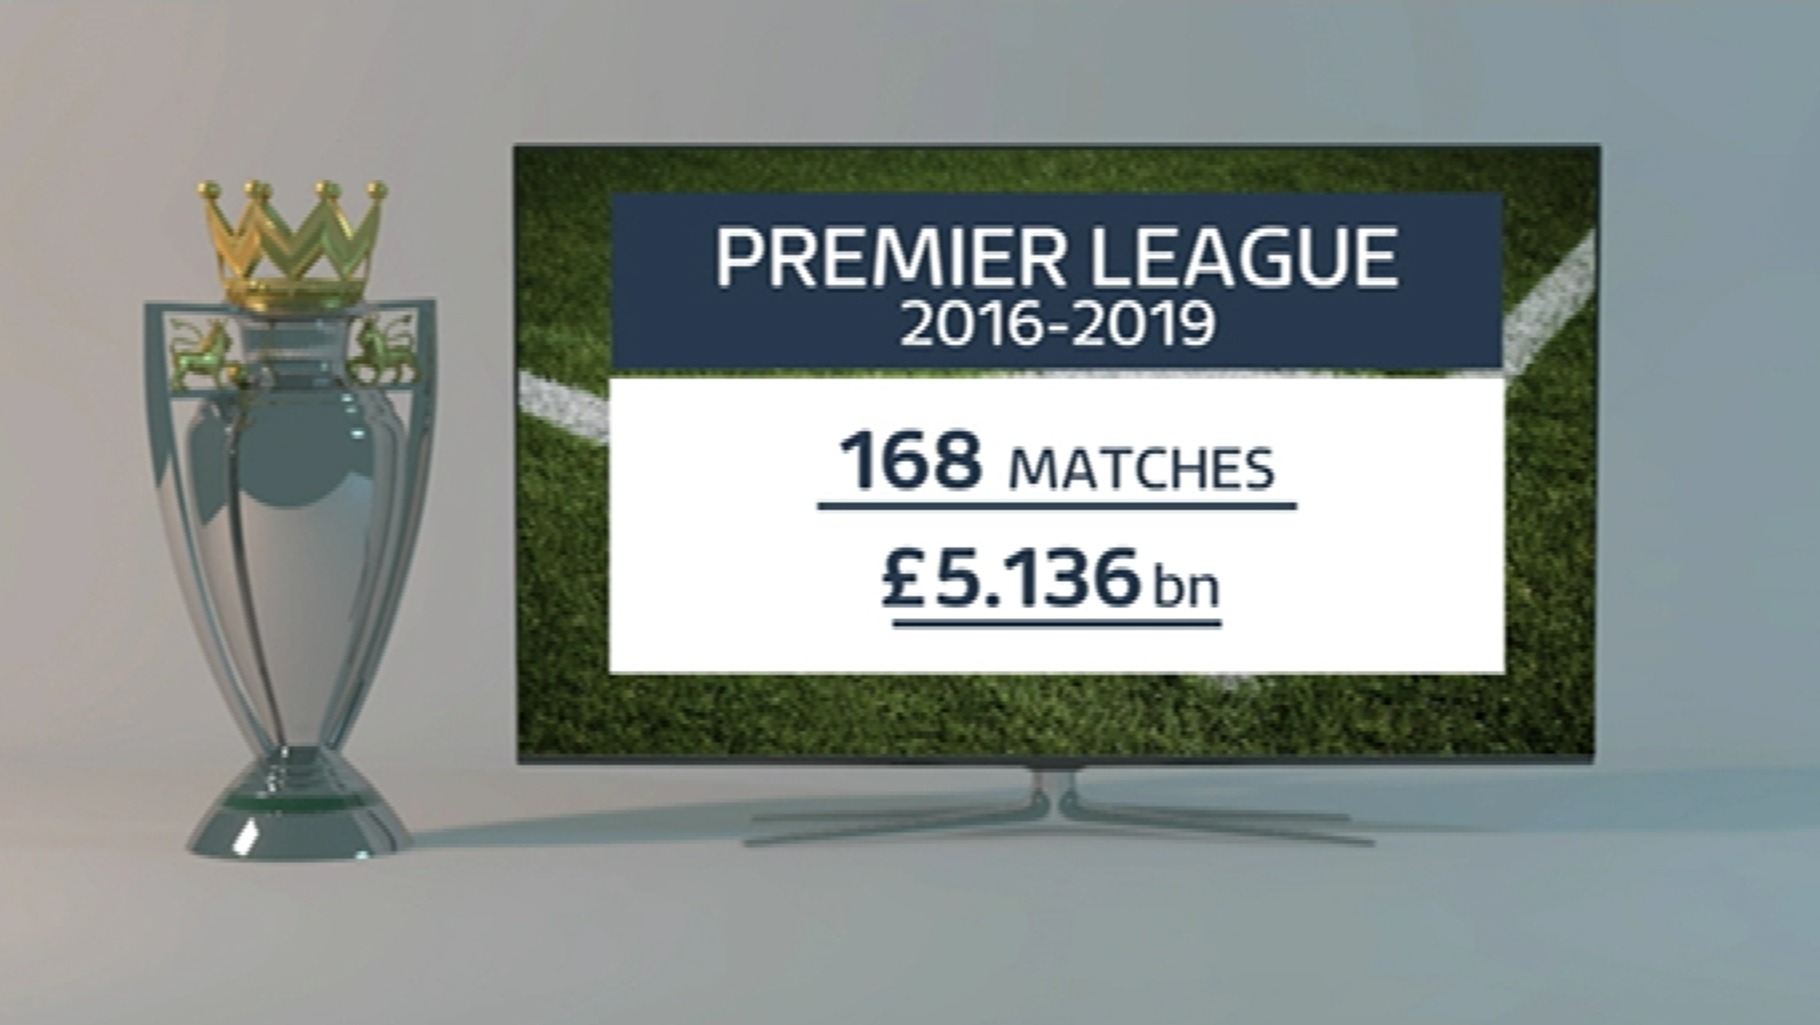 Premier League TV rights deal in numbers ITV News